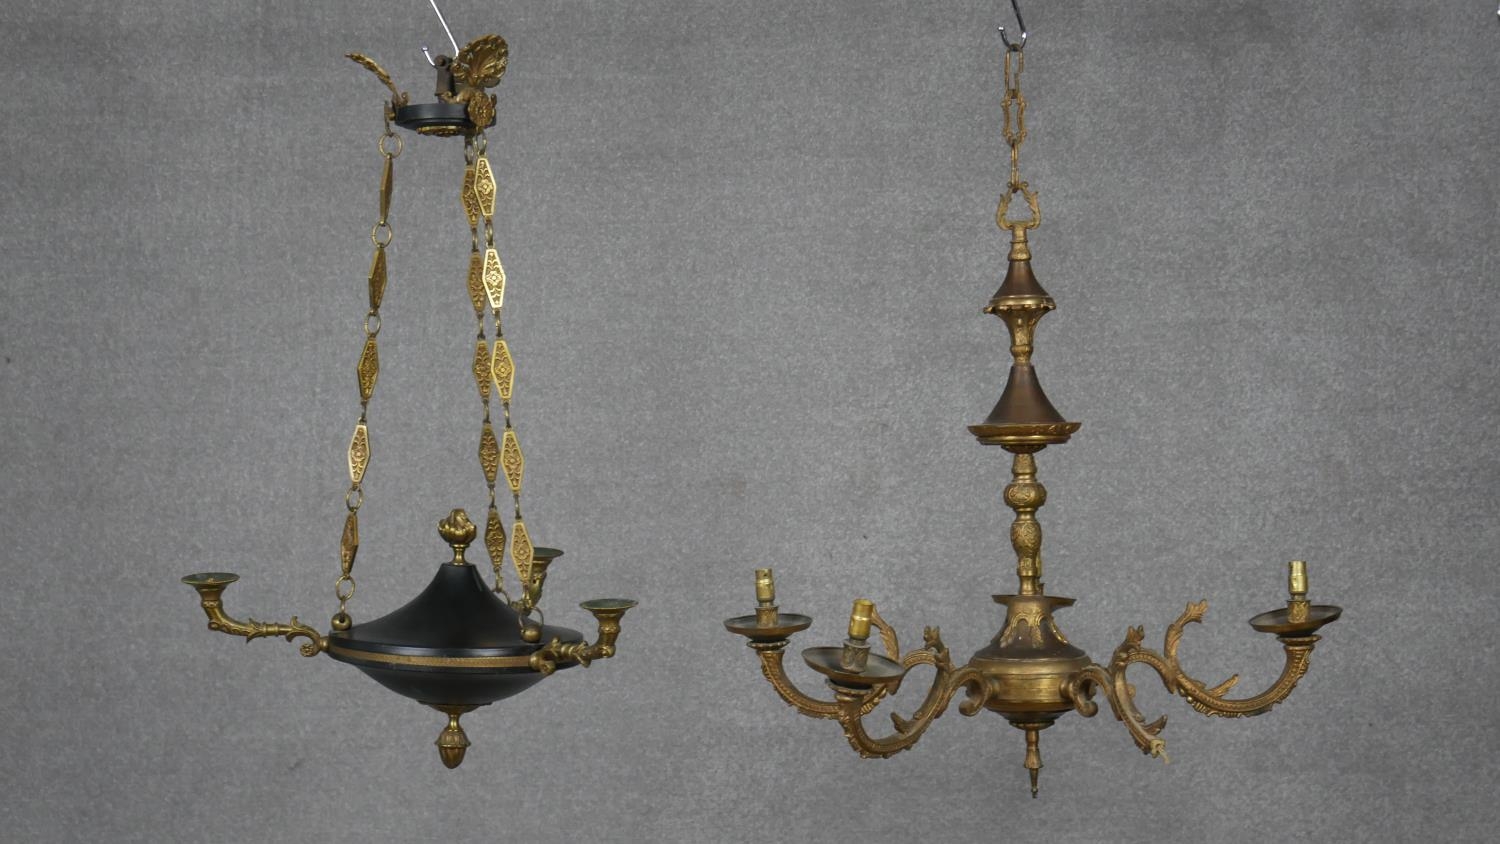 An antique brass and metal three branch ceiling chandelier along with a gilt five branch chandelier.